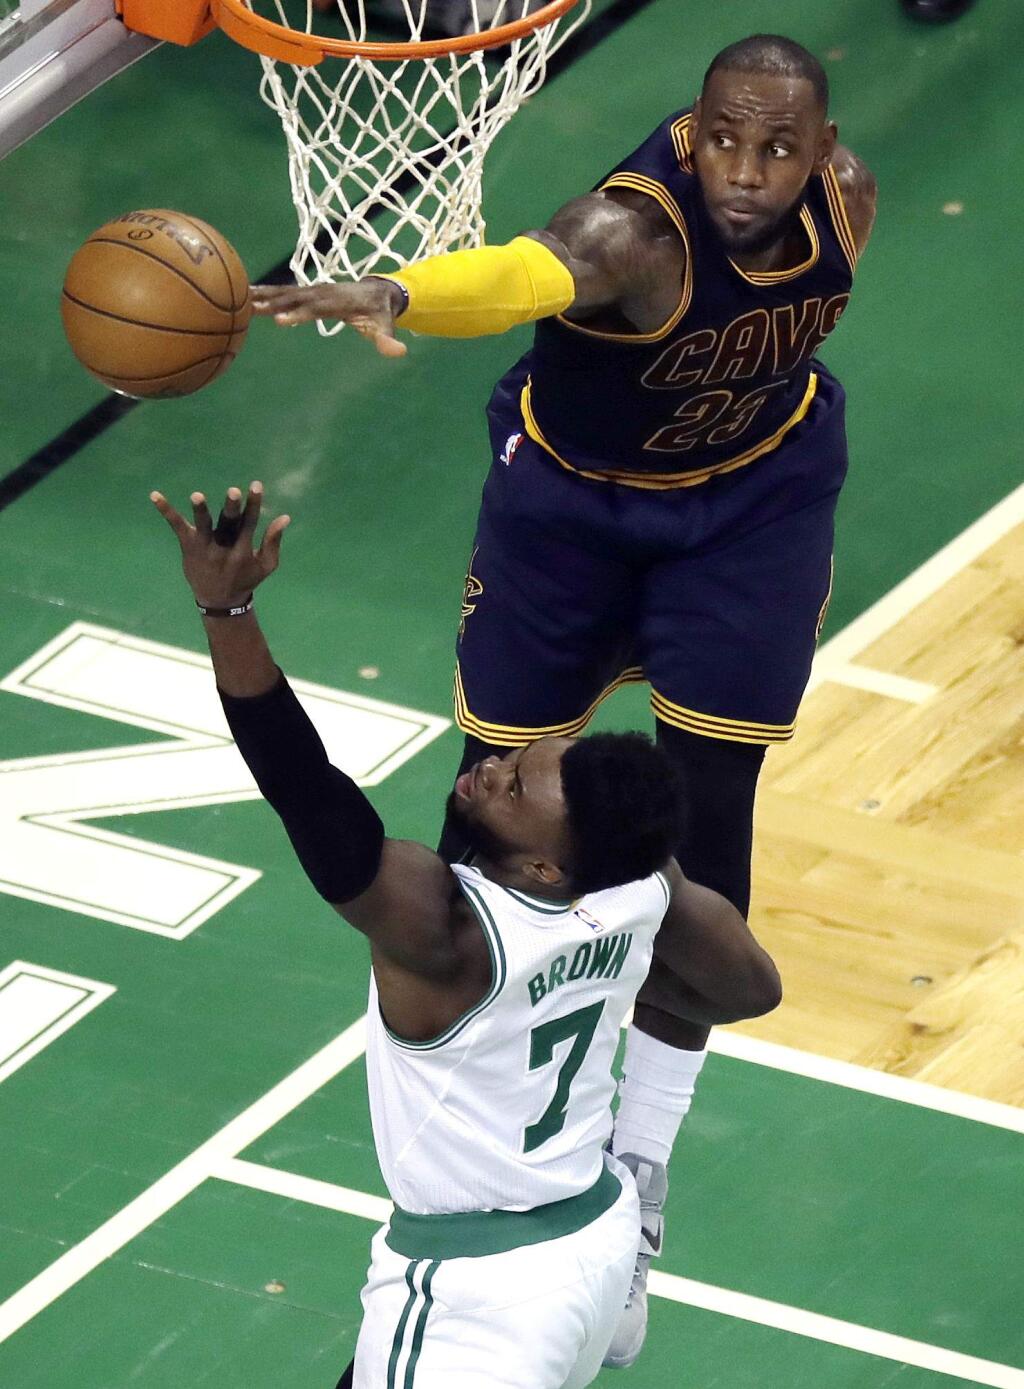 Cleveland Cavaliers forward LeBron James, top, blocks a shot by Boston Celtics forward Jaylen Brown during the first half of Game 5 of the NBA basketball Eastern Conference finals, on Thursday, May 25, 2017, in Boston. (AP Photo/Charles Krupa)